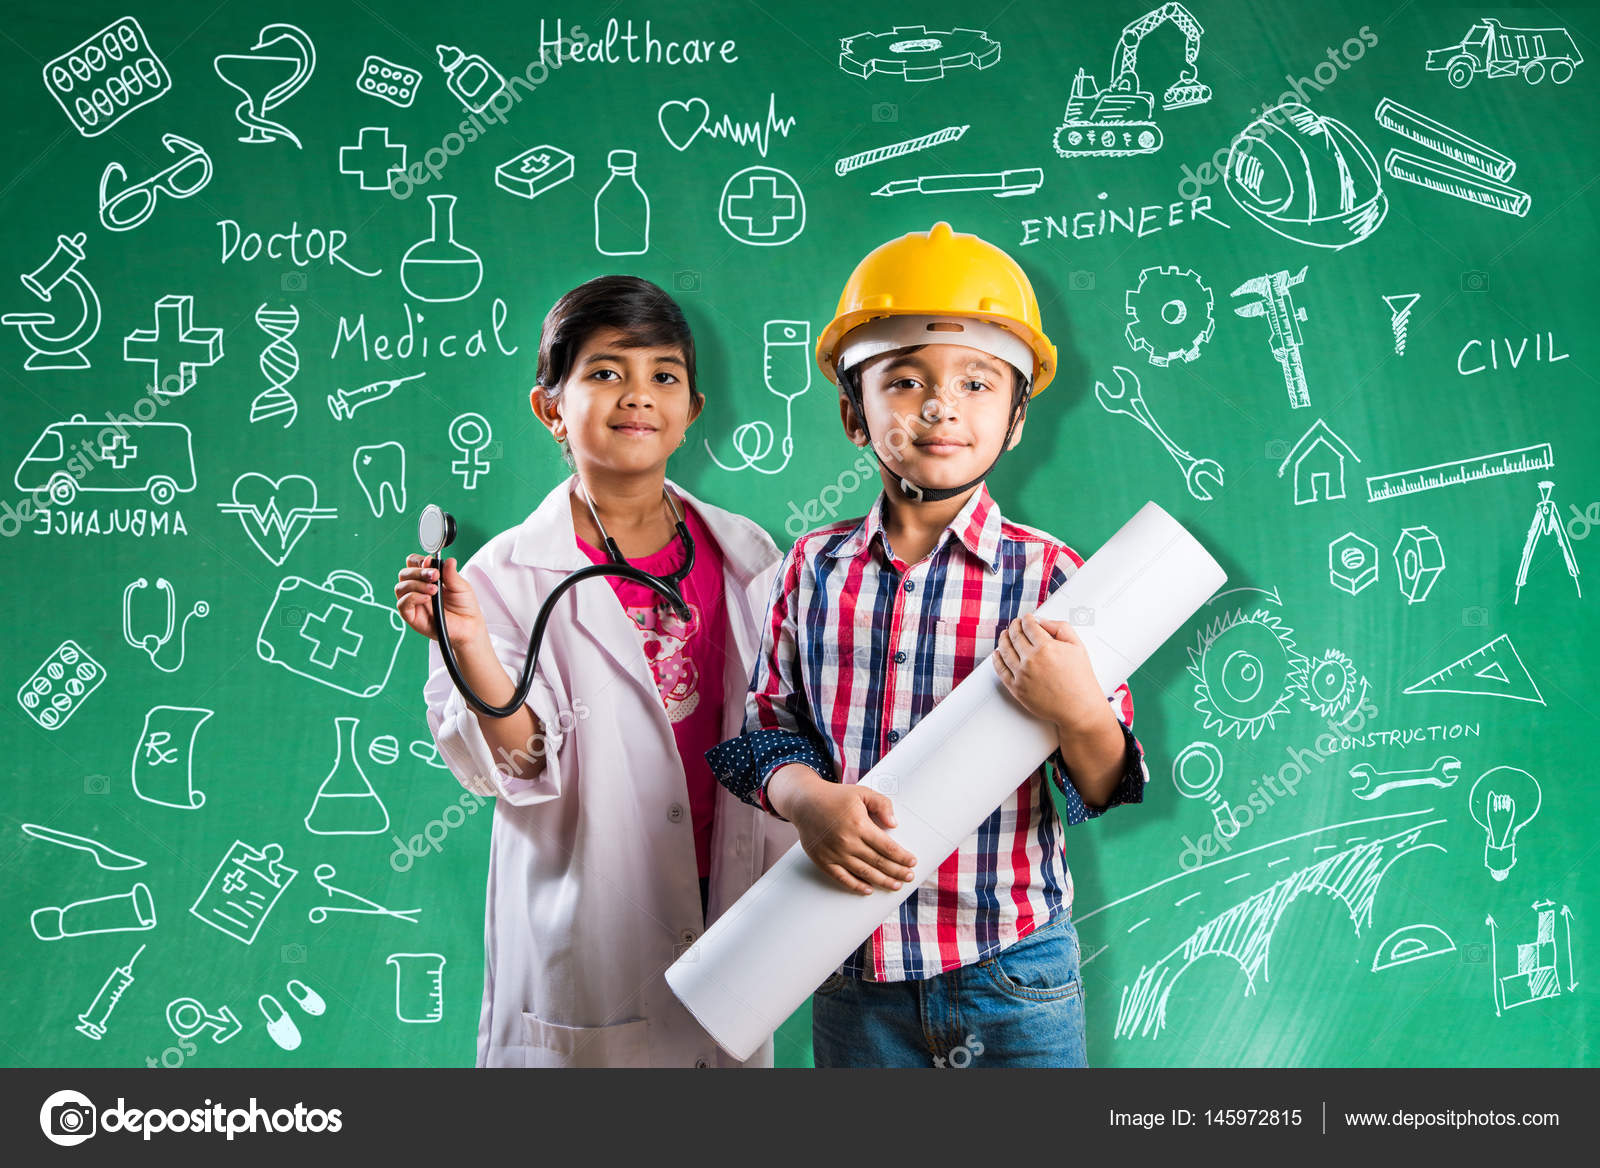 depositphotos 145972815 stock photo kids and education concept small